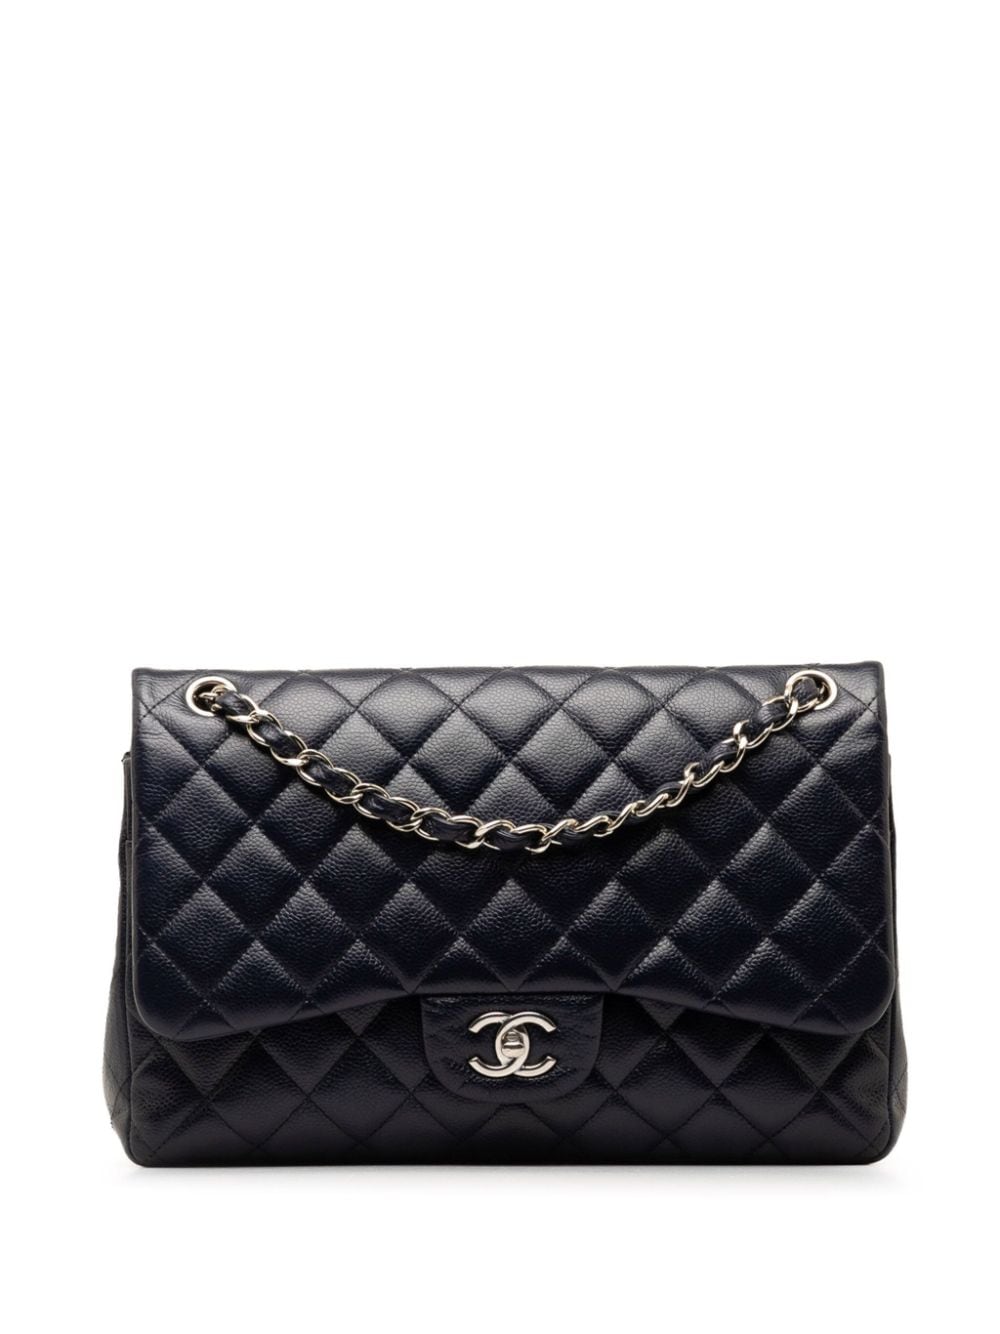 Pre-owned Chanel 2014 Jumbo Classic Caviar Double Flap Shoulder Bag In Blue